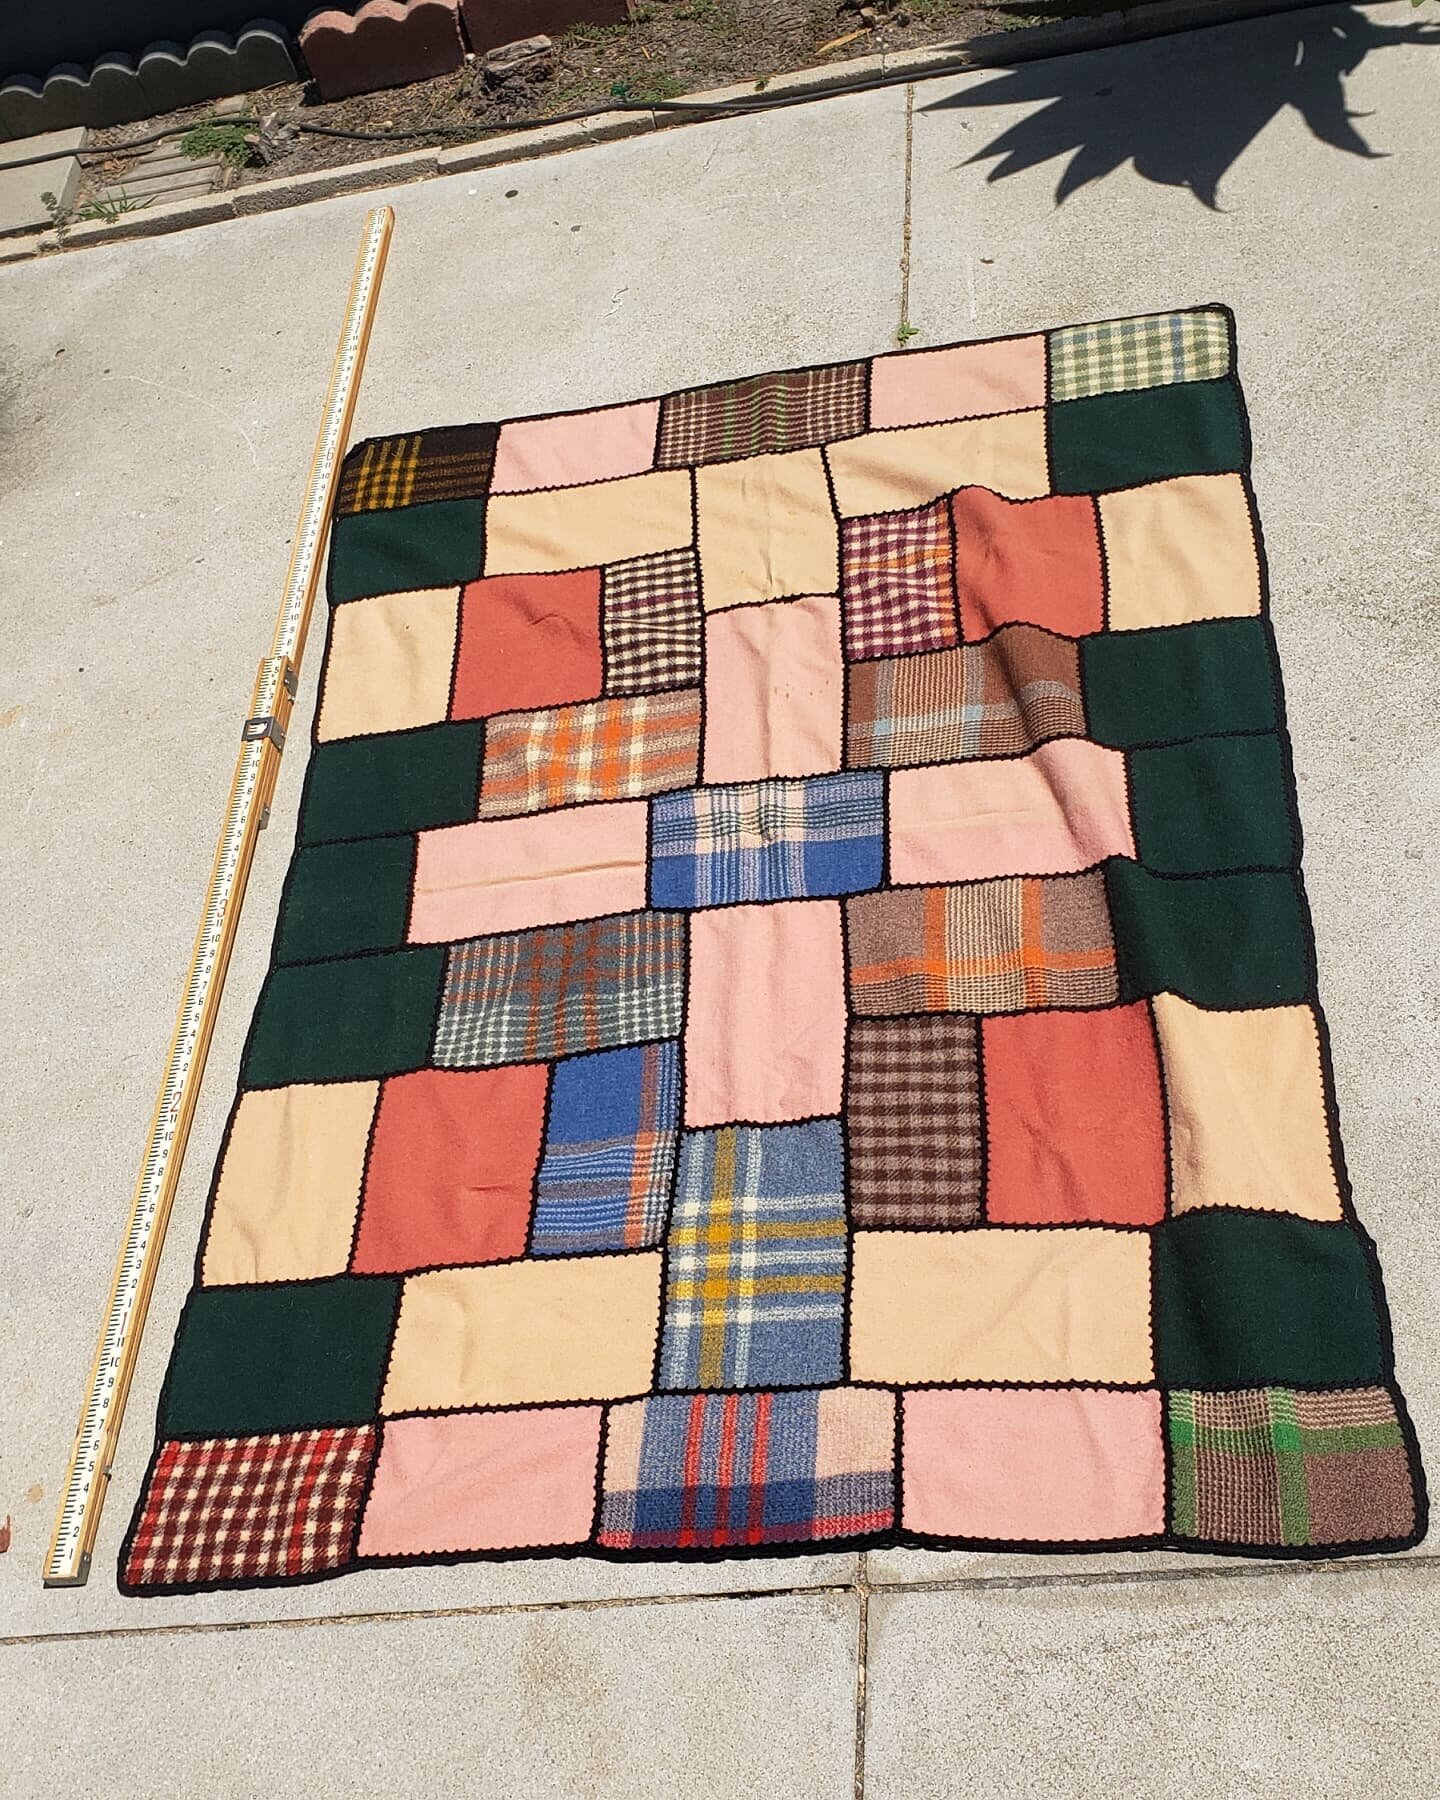 $45. 1950s quilt blanket embroidered hand quilted textile.  6 feet long. Original owner told me her mom made it for her in the late 1950s. 
Plus tax.
This item is located in my Antique Mall booth in the city or Orange. Text Message (don't call) for a